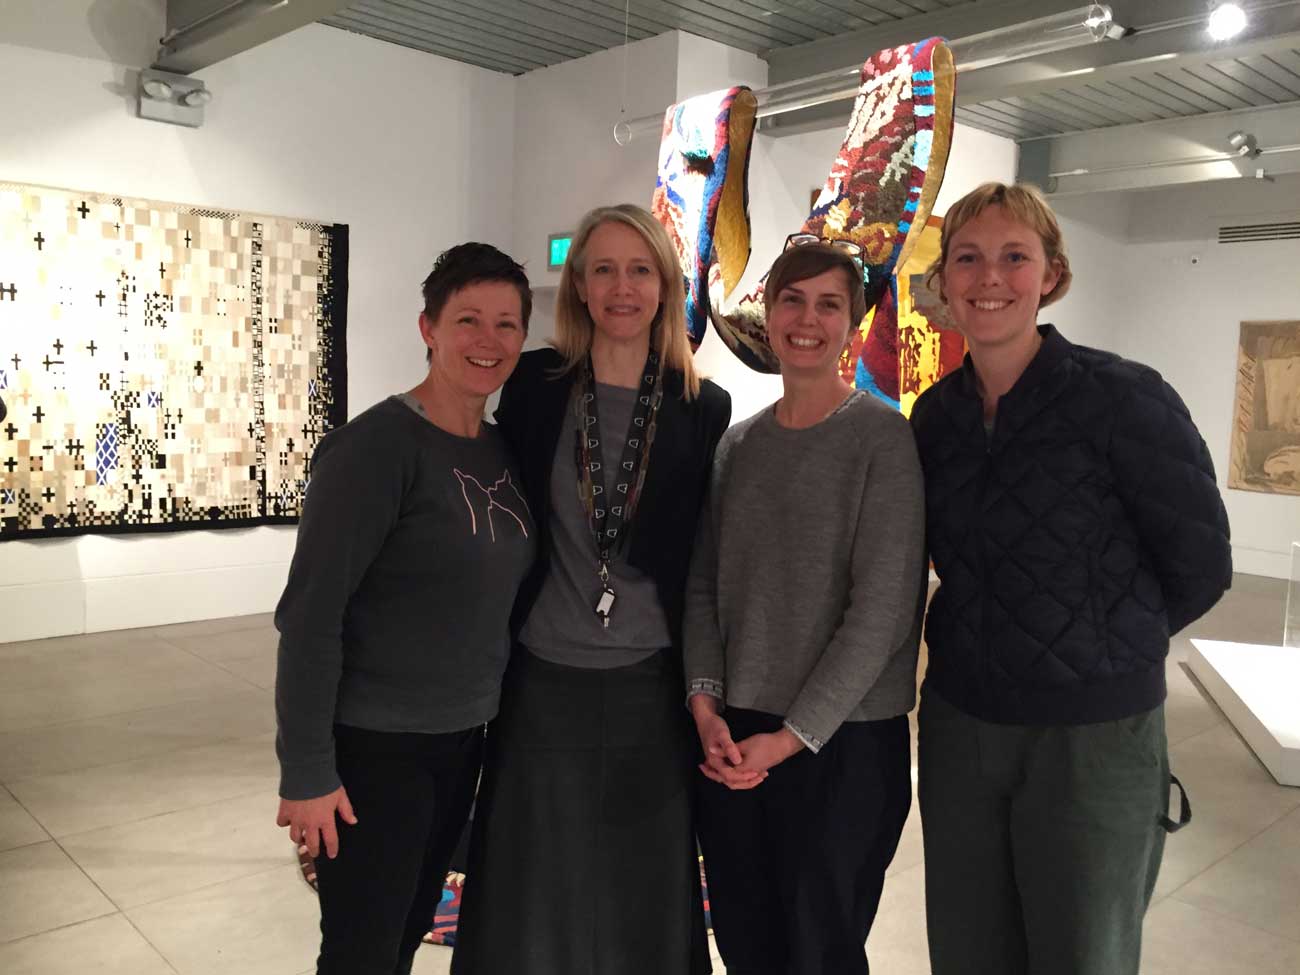 ATW Weaver Interns with Celia Joicey, Director of Dovecot Studios